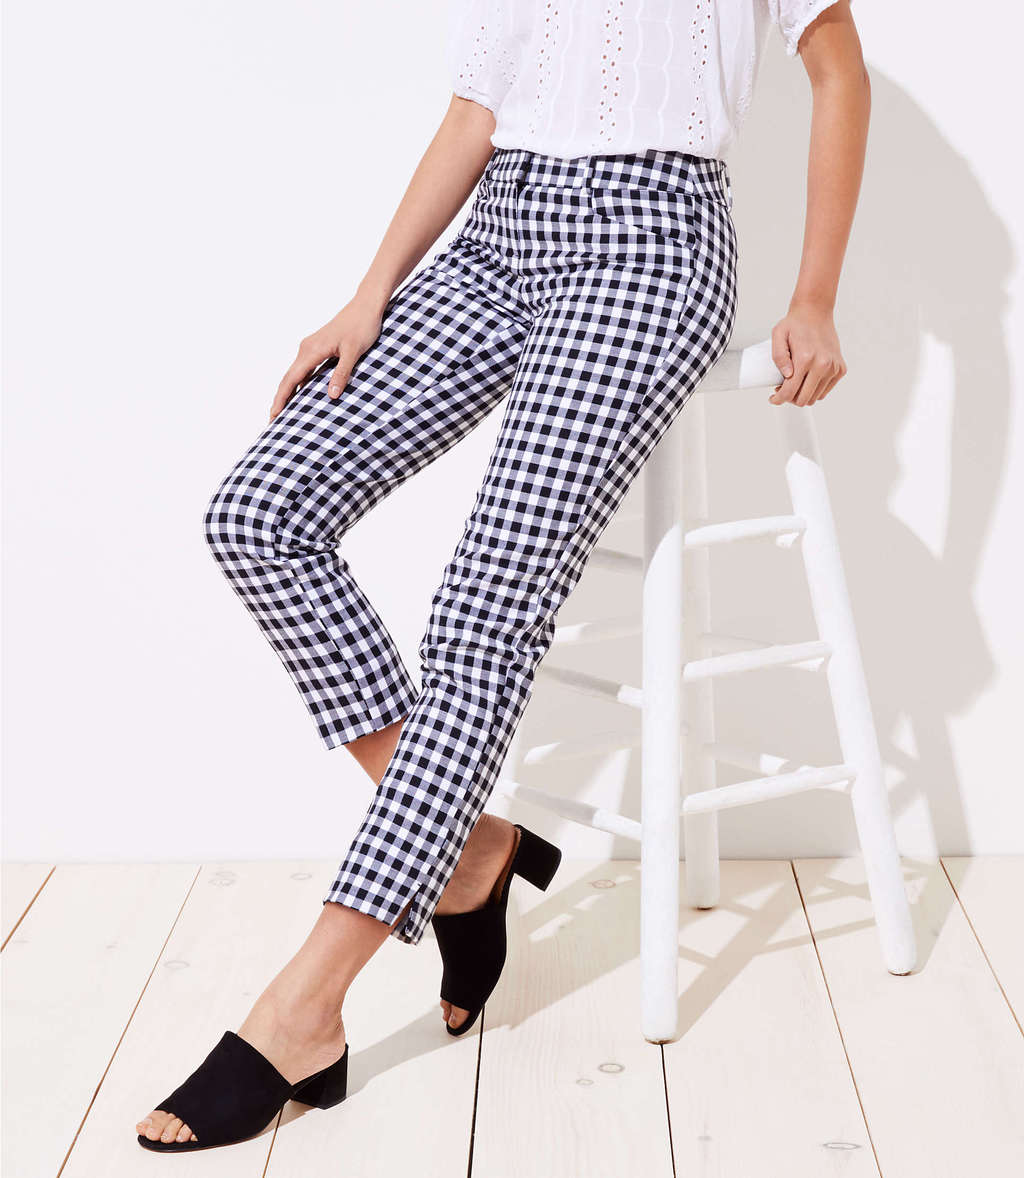 The Best Gingham Fashion Finds for Spring/Summer 2018 - College Fashion